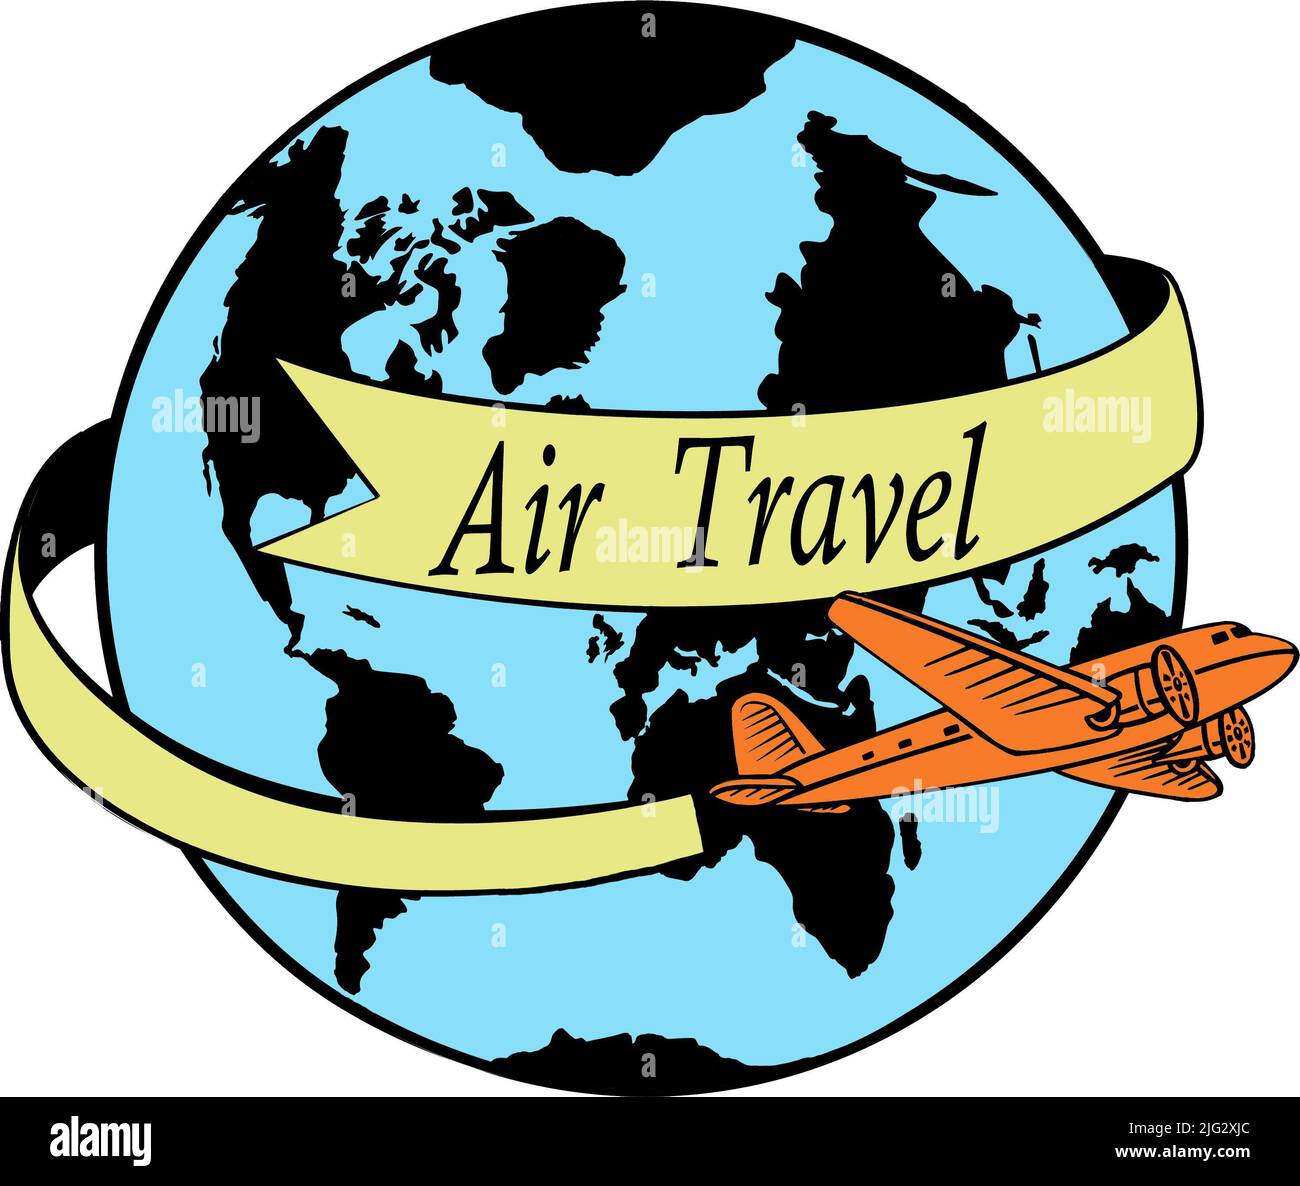 A vintage propeller airplane flying around the world in a retro style illustration. Stock Photo